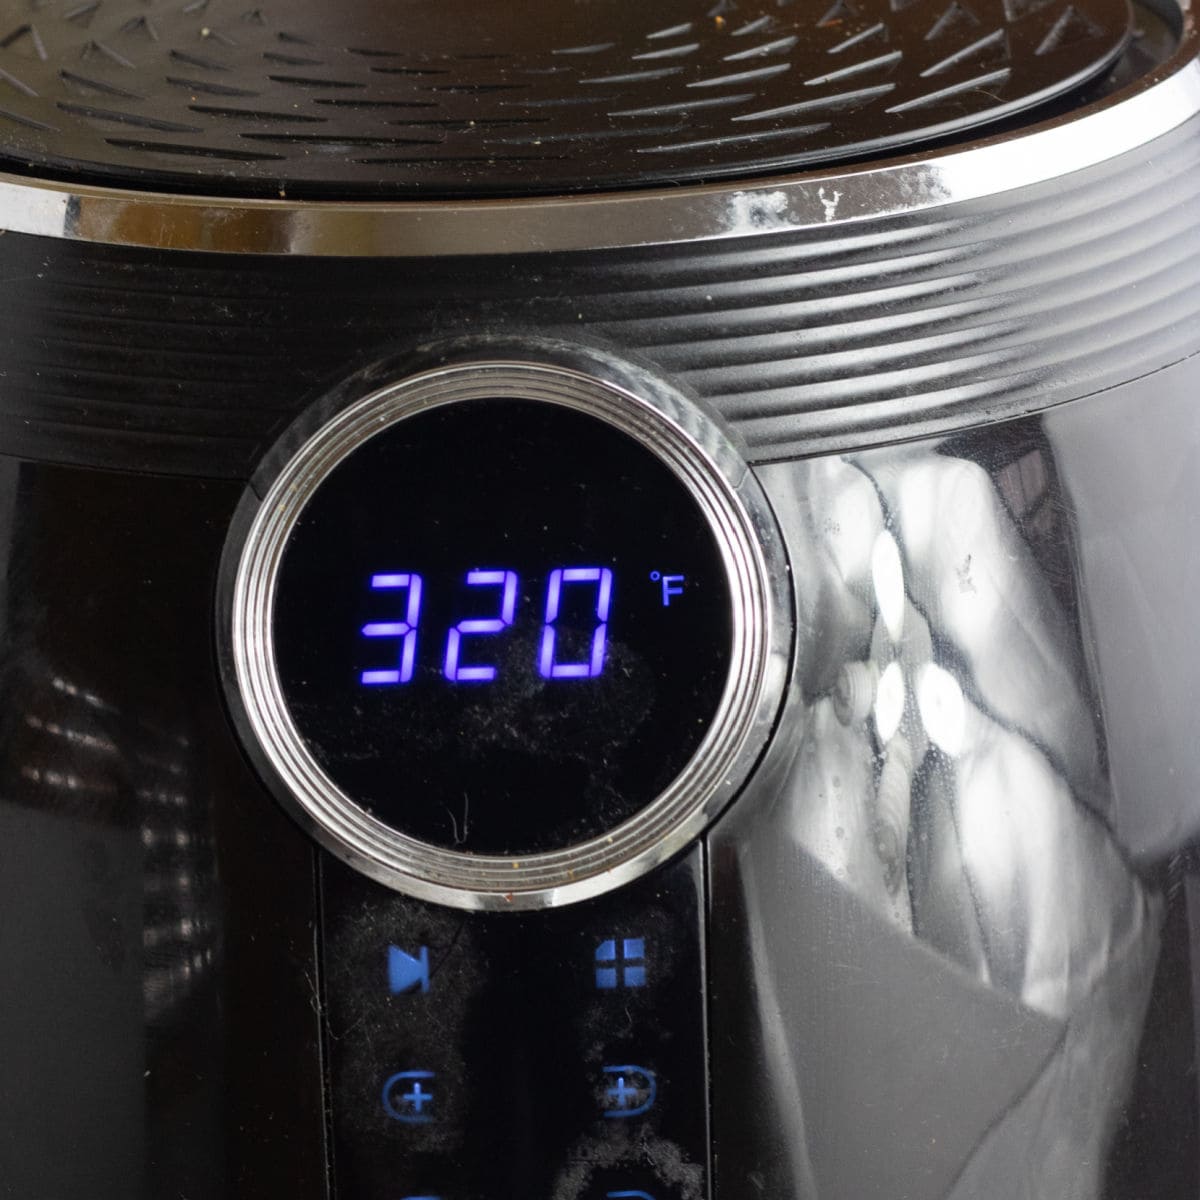 Air fryer showing the temperature at 320 degrees.